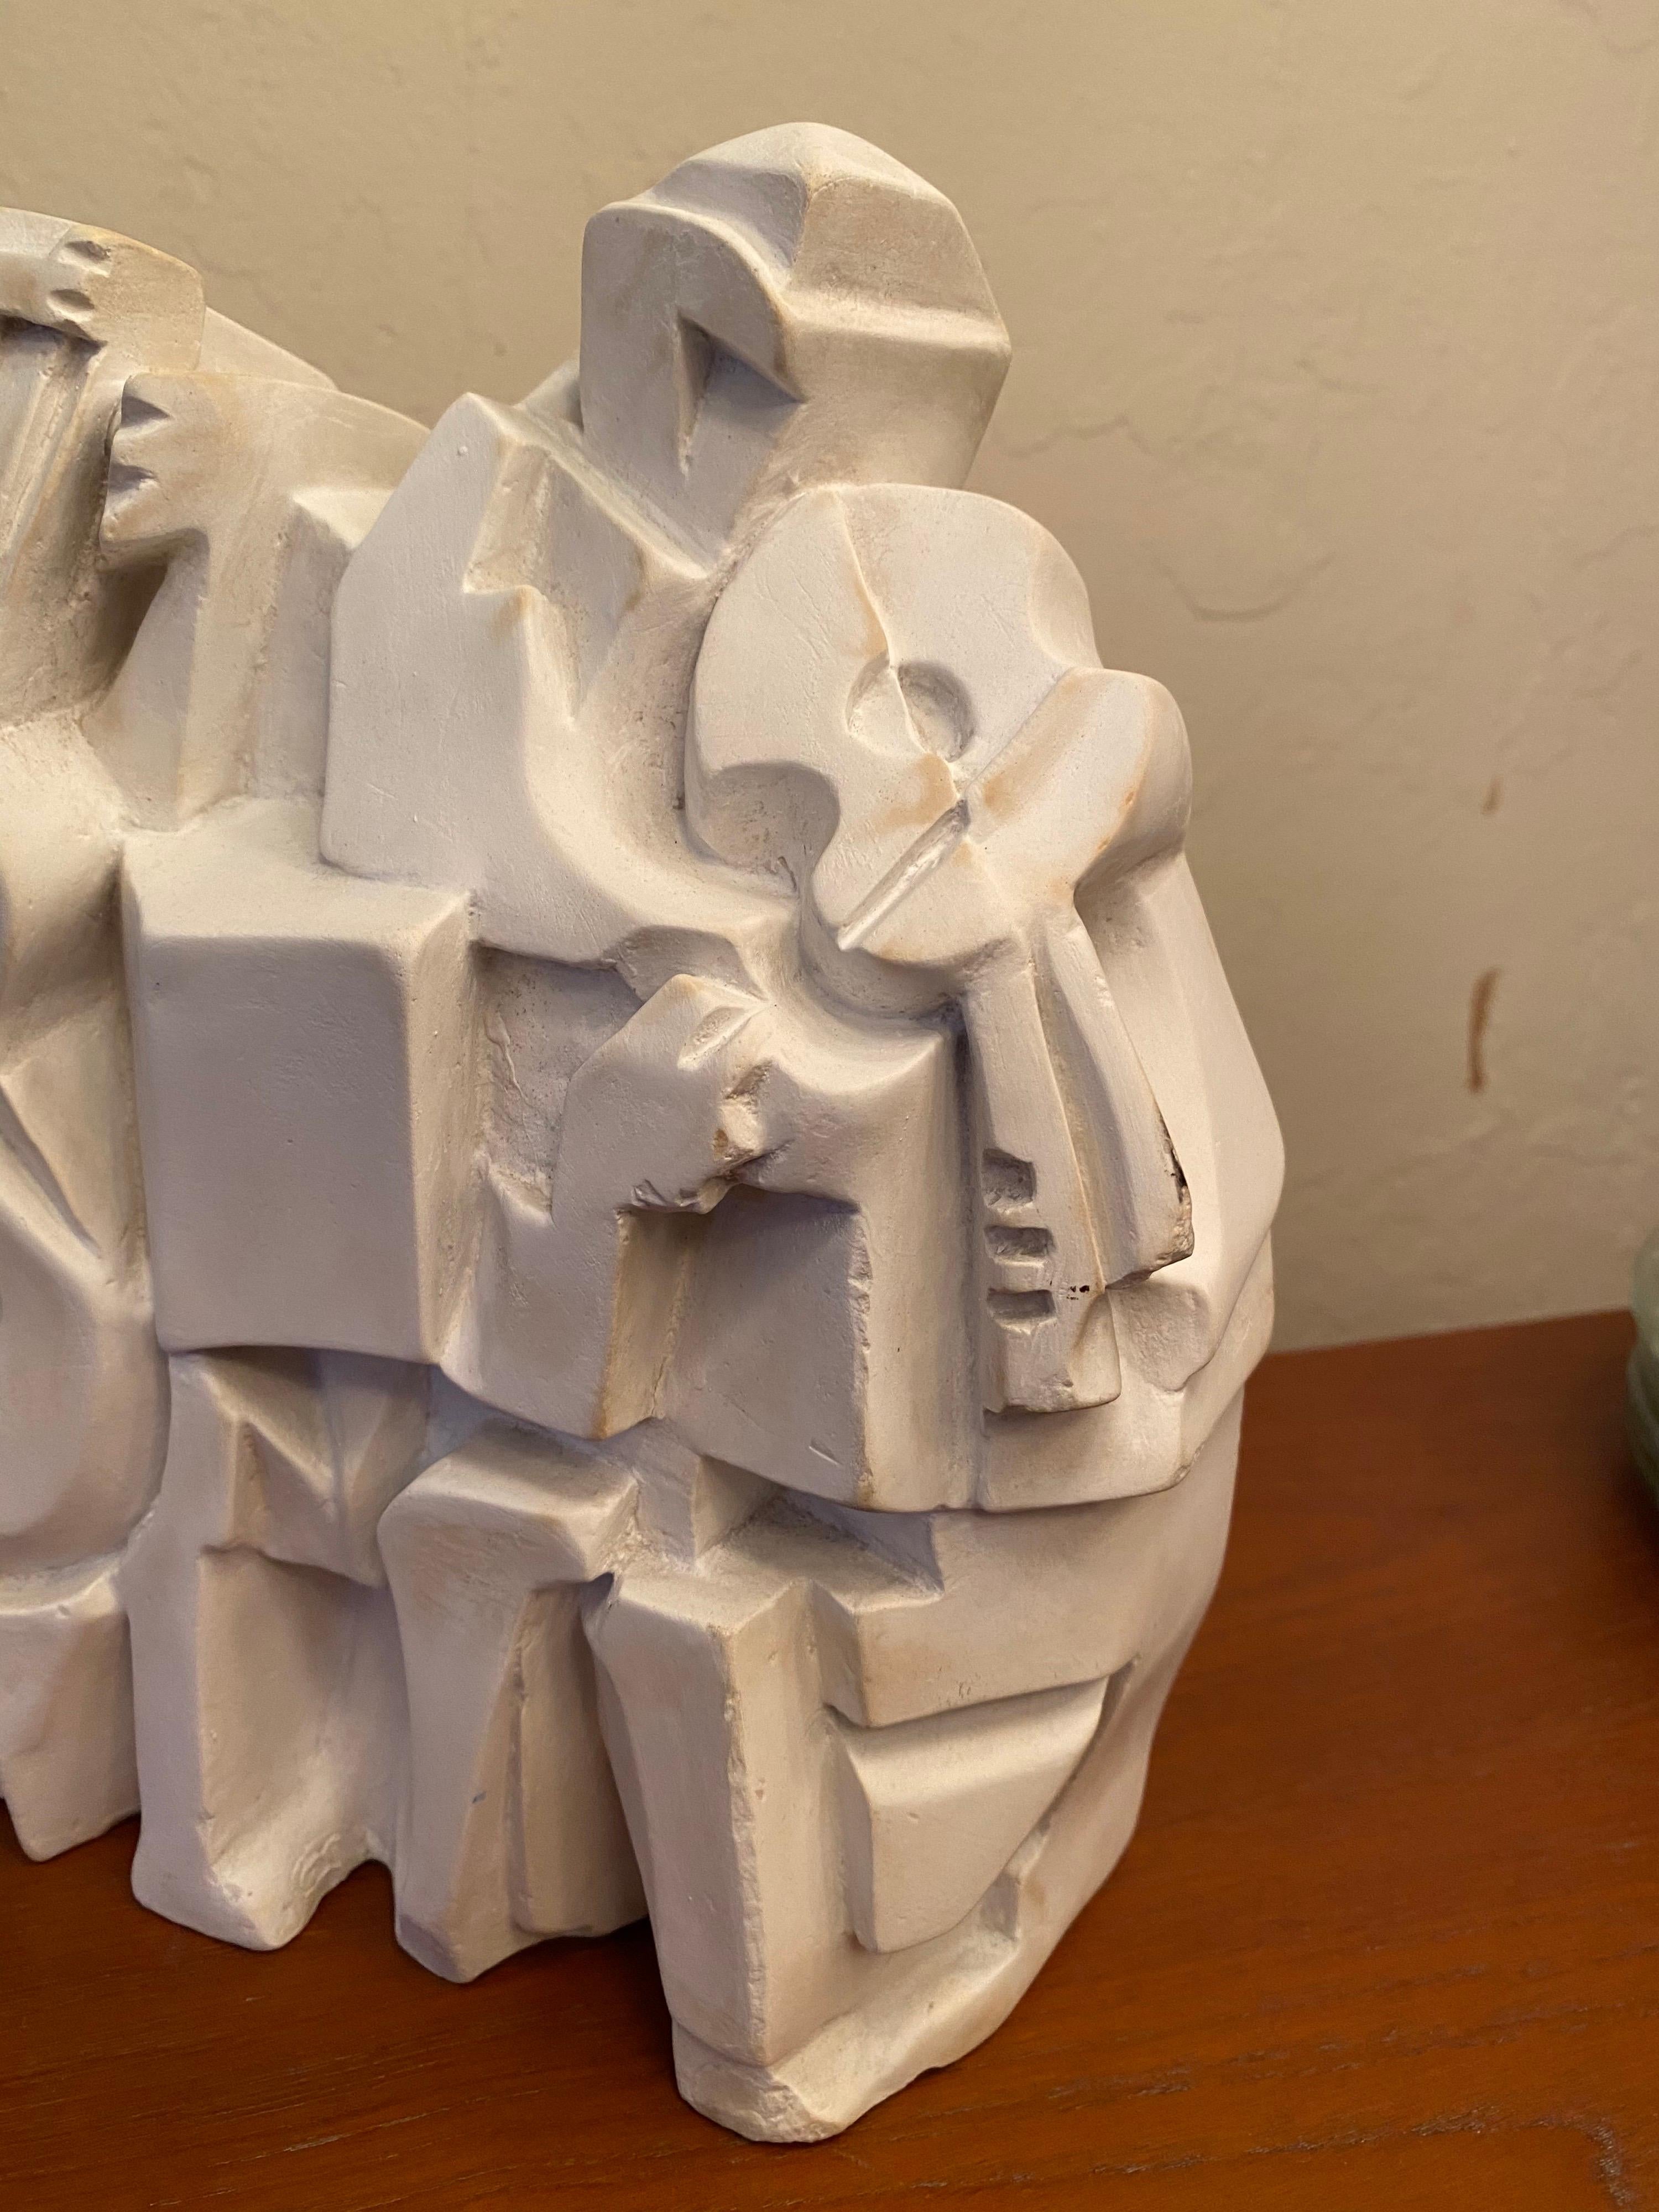 Austin productions did some great decorative cast plaster pieces over their time in business, this might be one of their best! Cubist musicians in an original white finish.